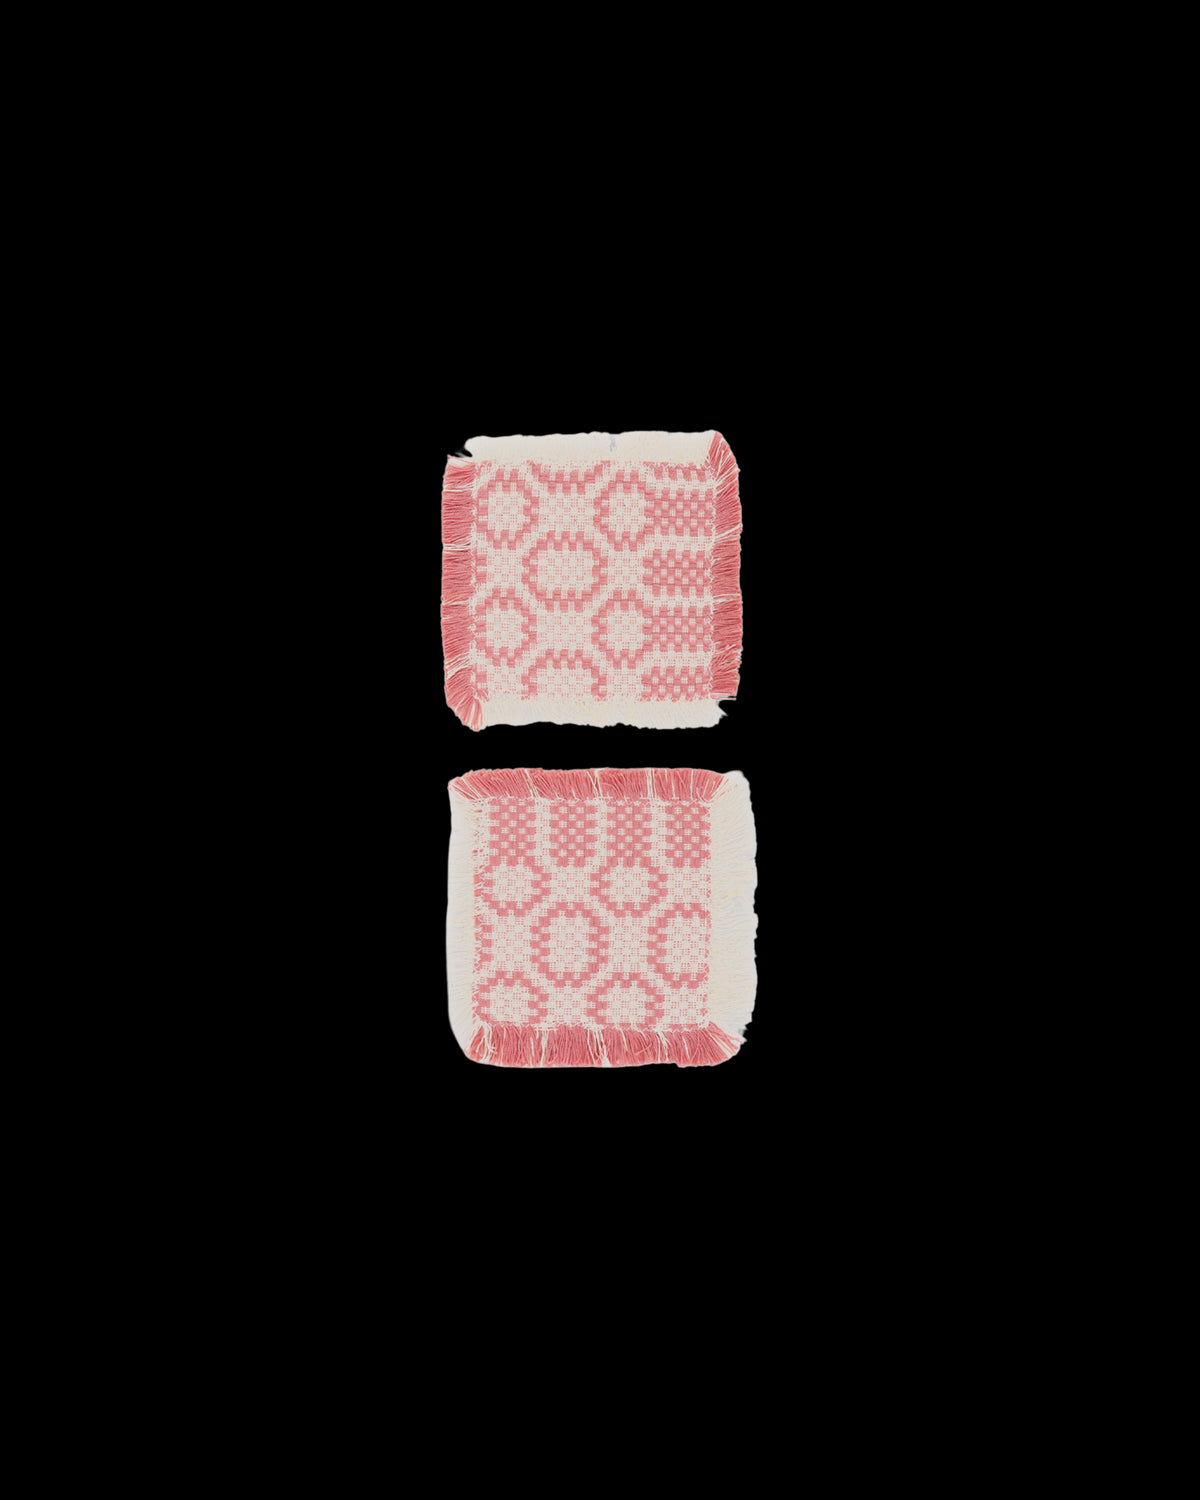 Lecce Coasters in Pink, Set of 2